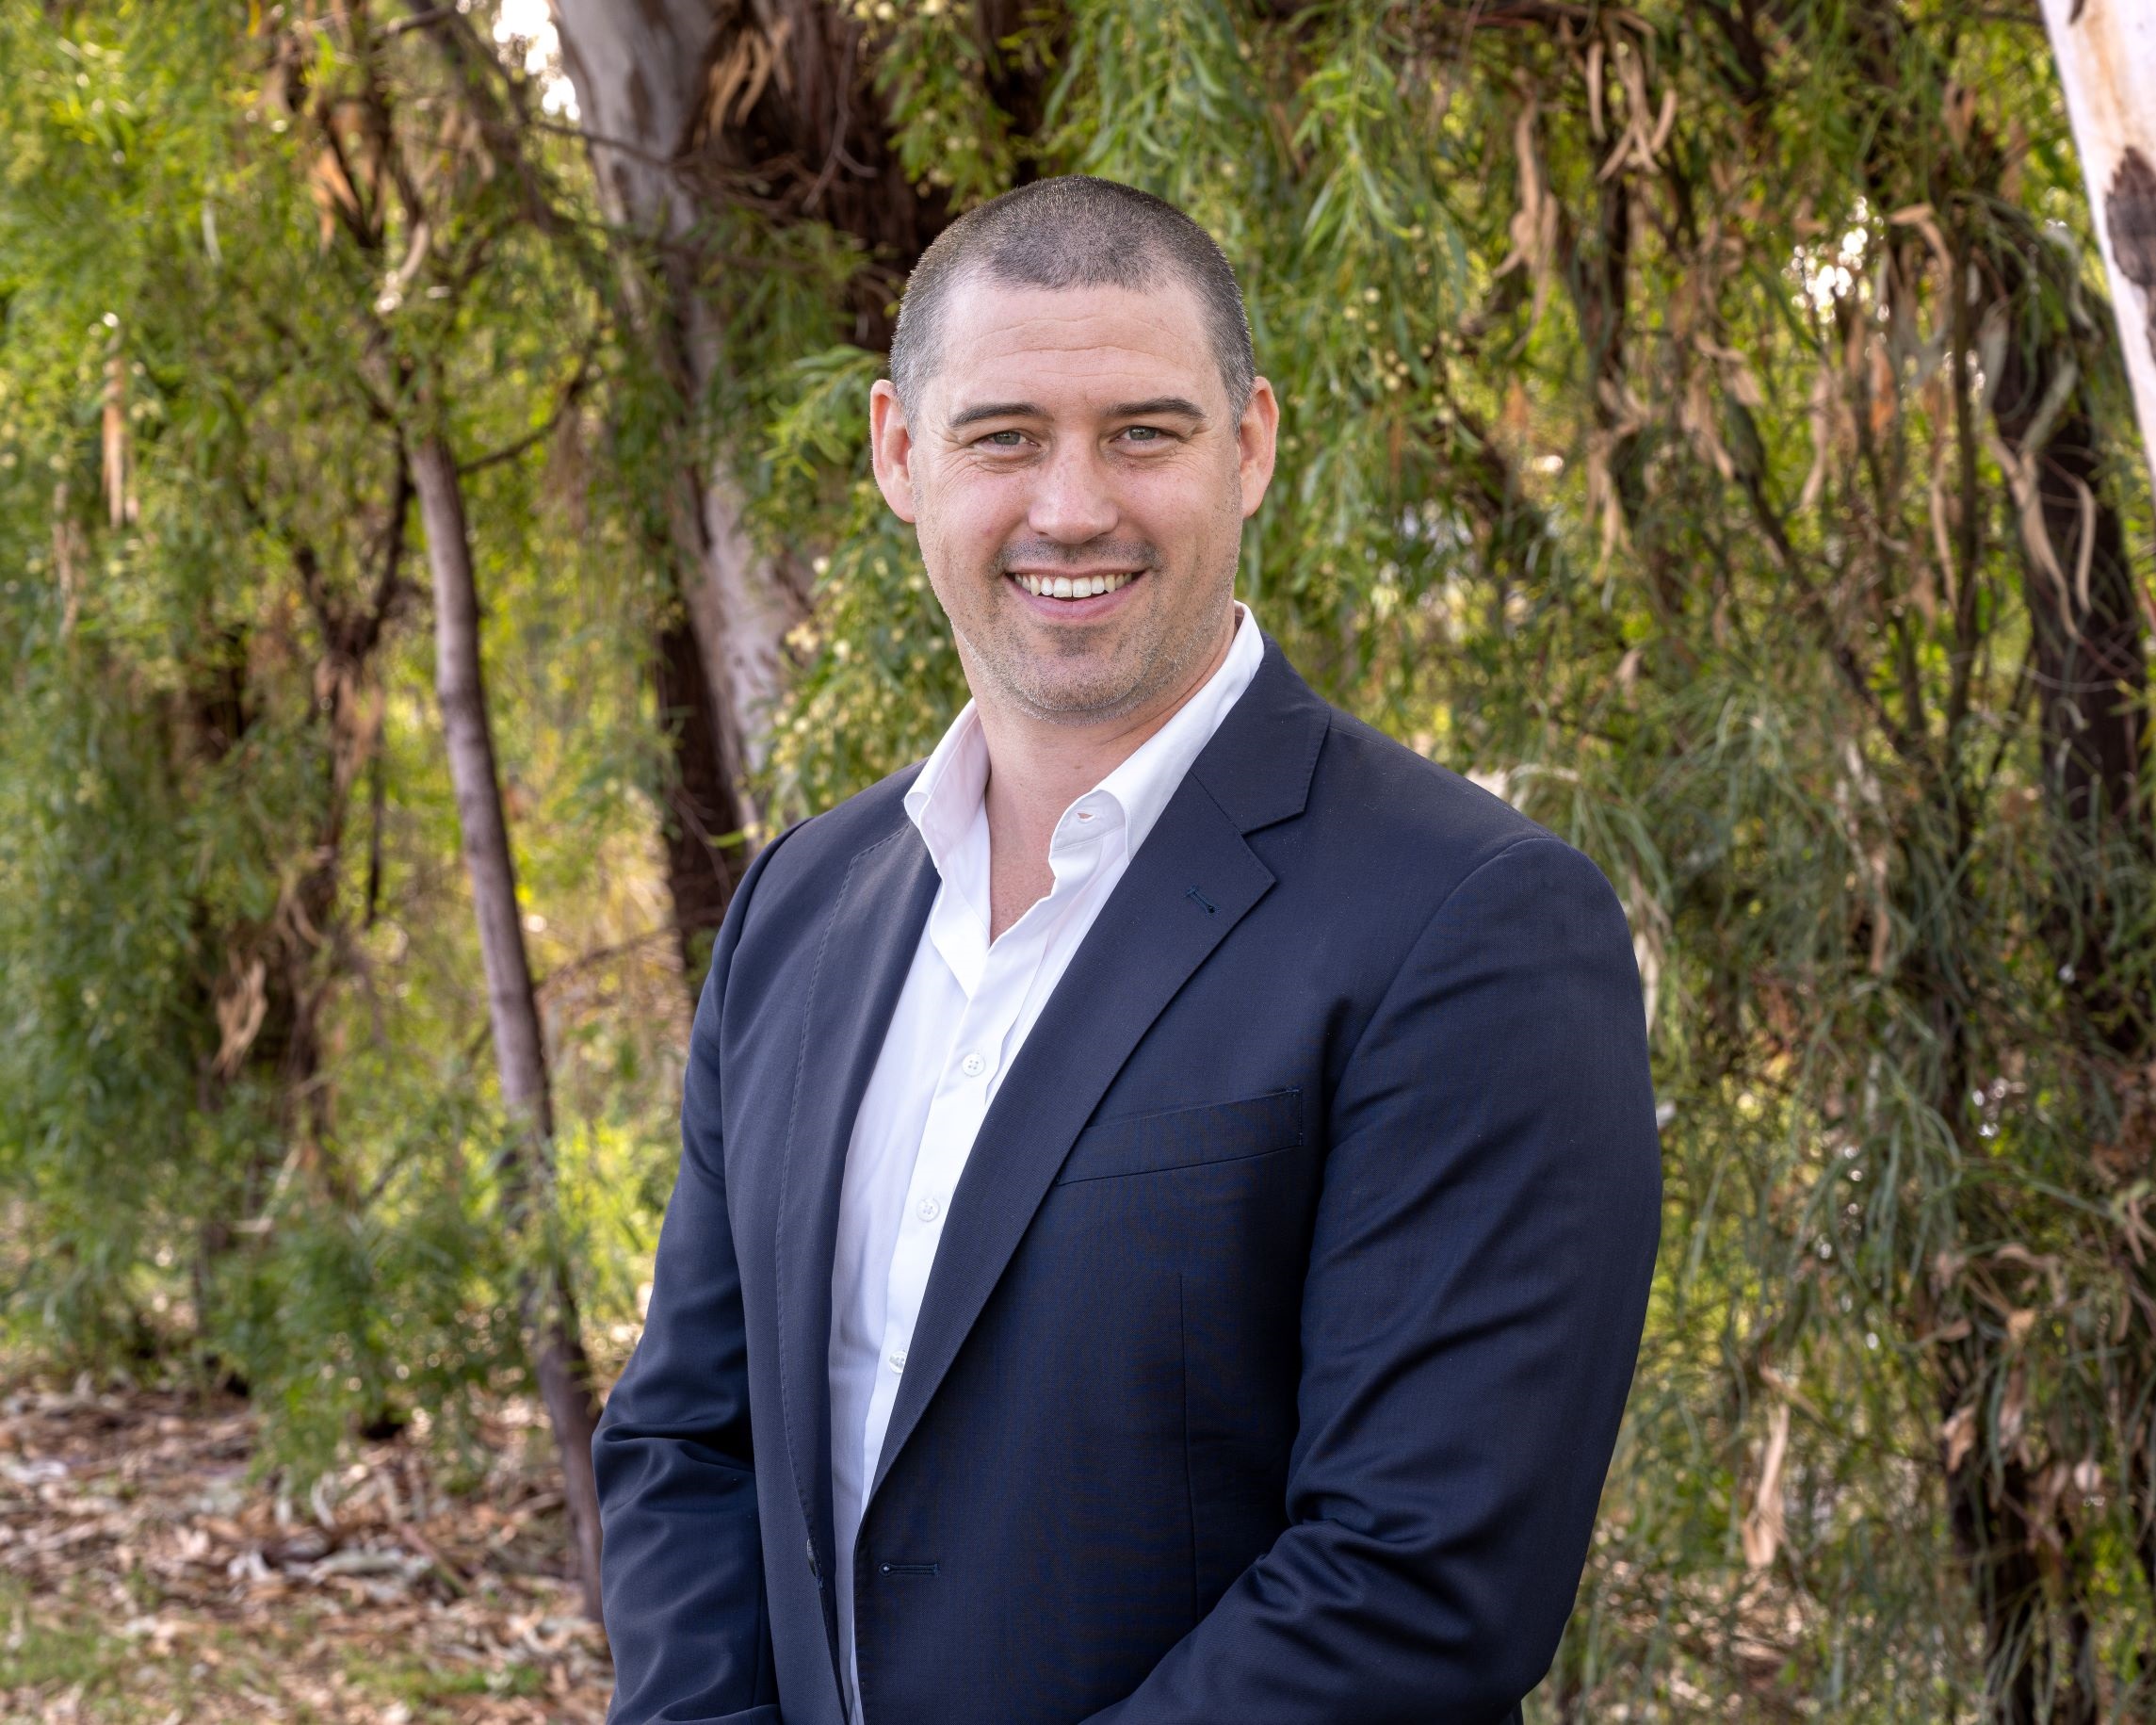 GM Daniel Fletcher stands in front of Myall Creek greenery, wearing a navy suit and smiling.